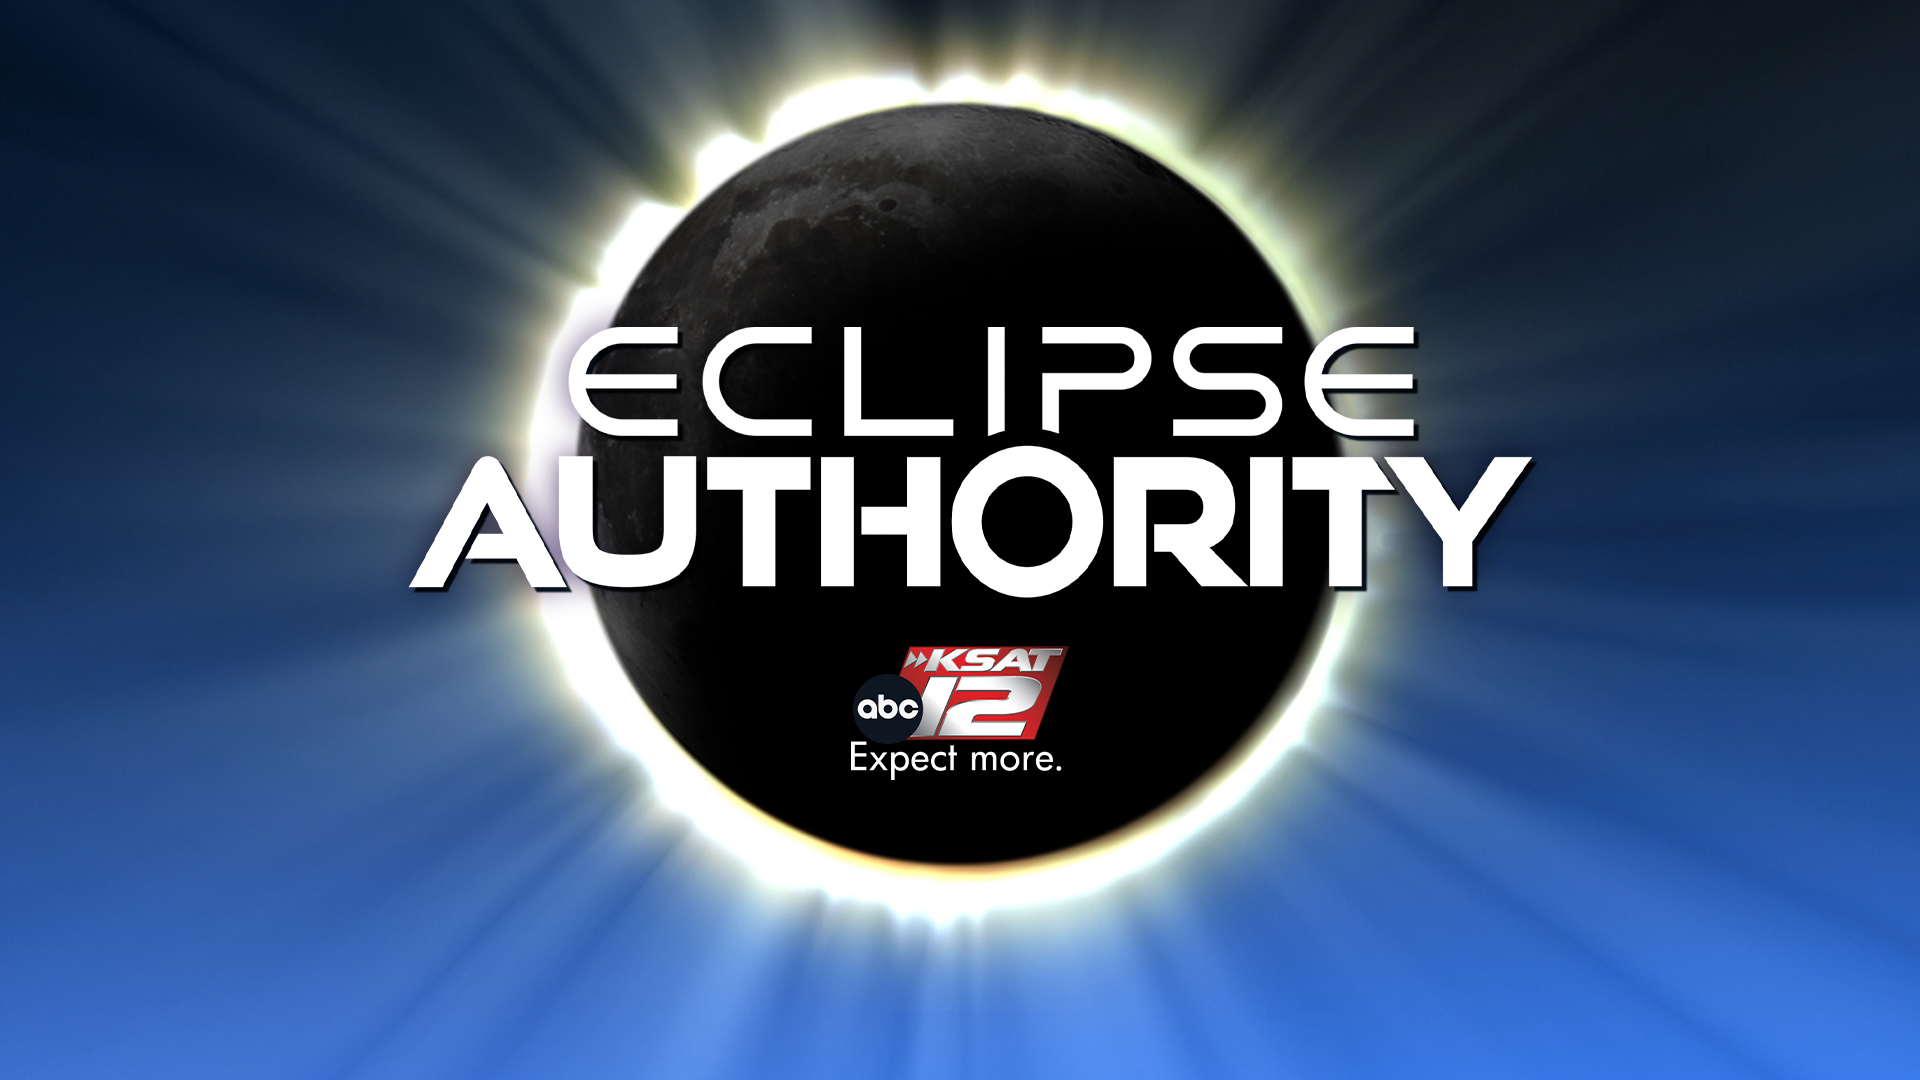 Rare solar eclipse occurs Thursday morning; Next eclipse viewable here